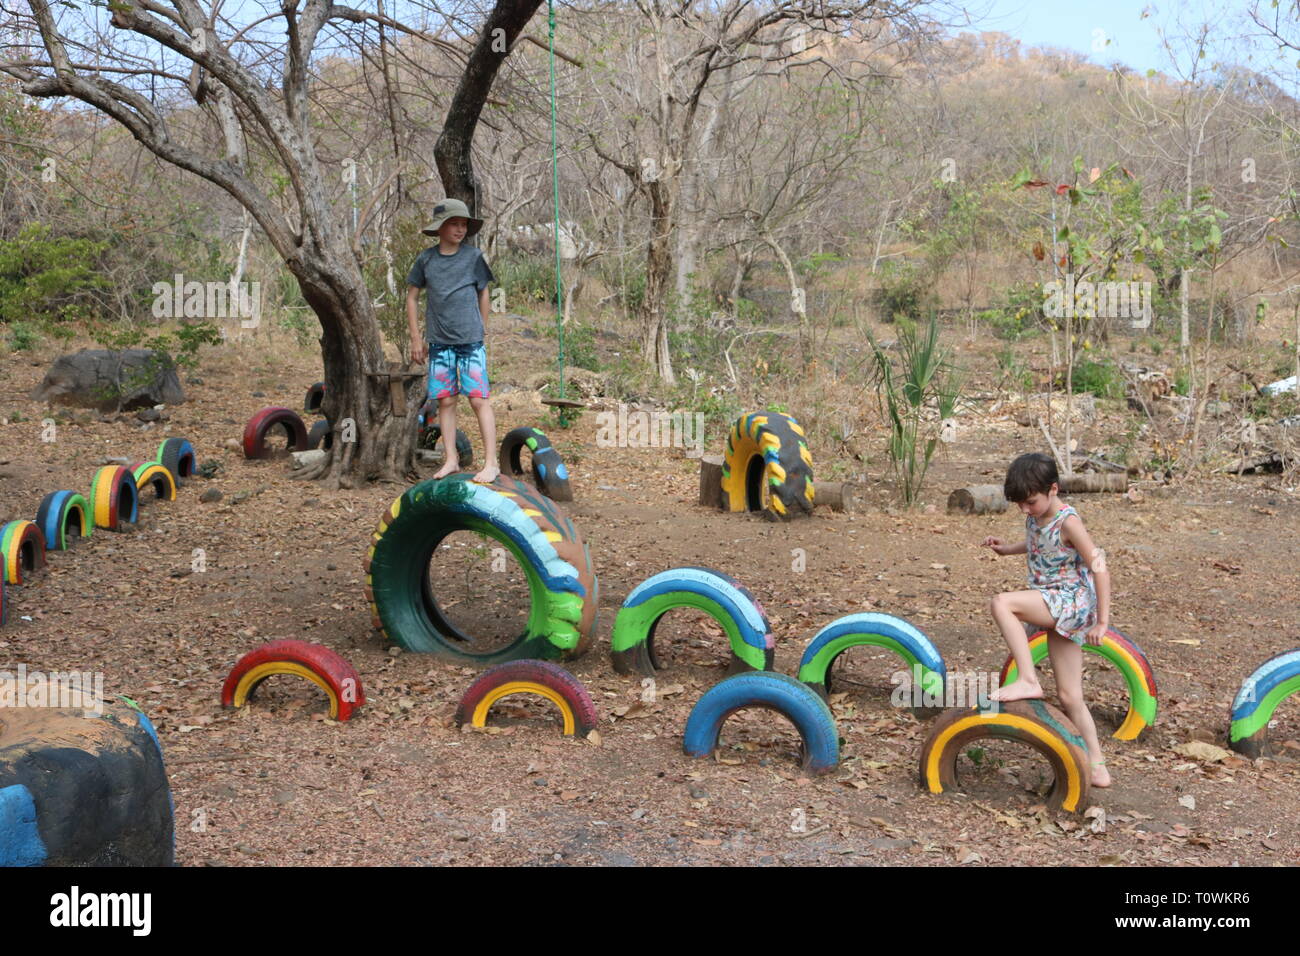 Children playing on a playground in Central America made of brightly painted recycled tires Stock Photo